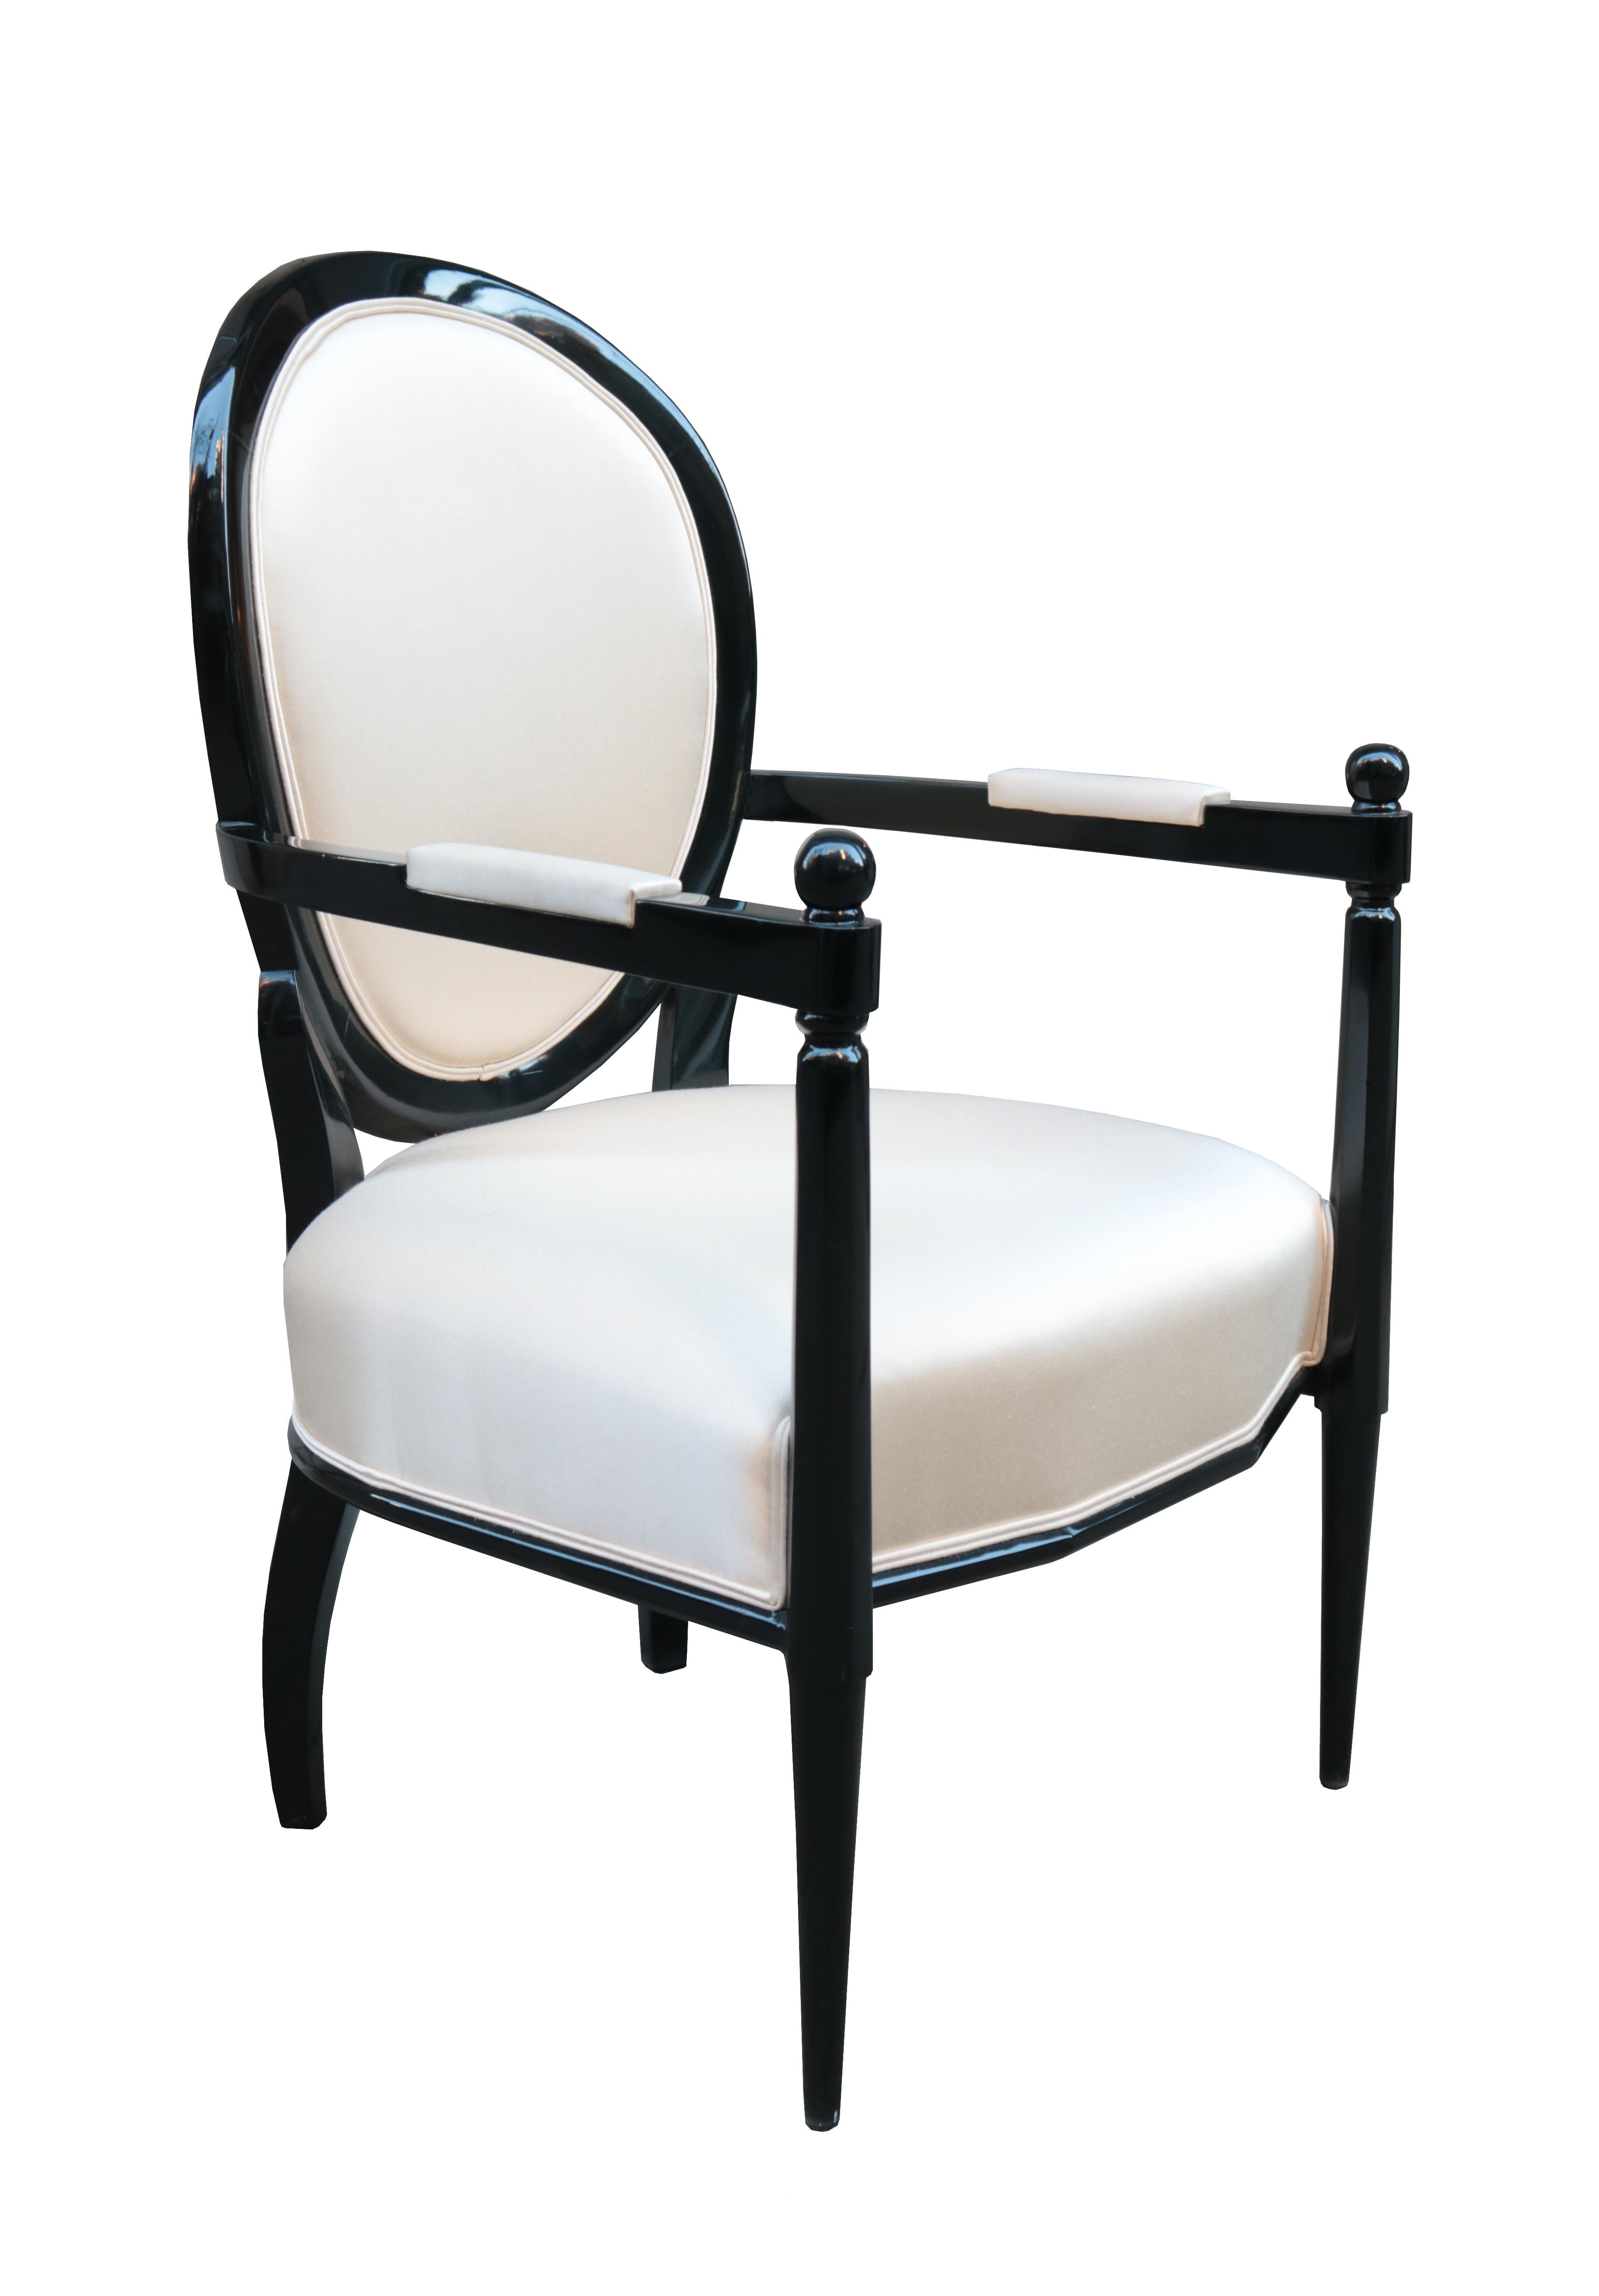 Pair of Neoclassically inspired ebonized armchairs.
Black lacquered wood.